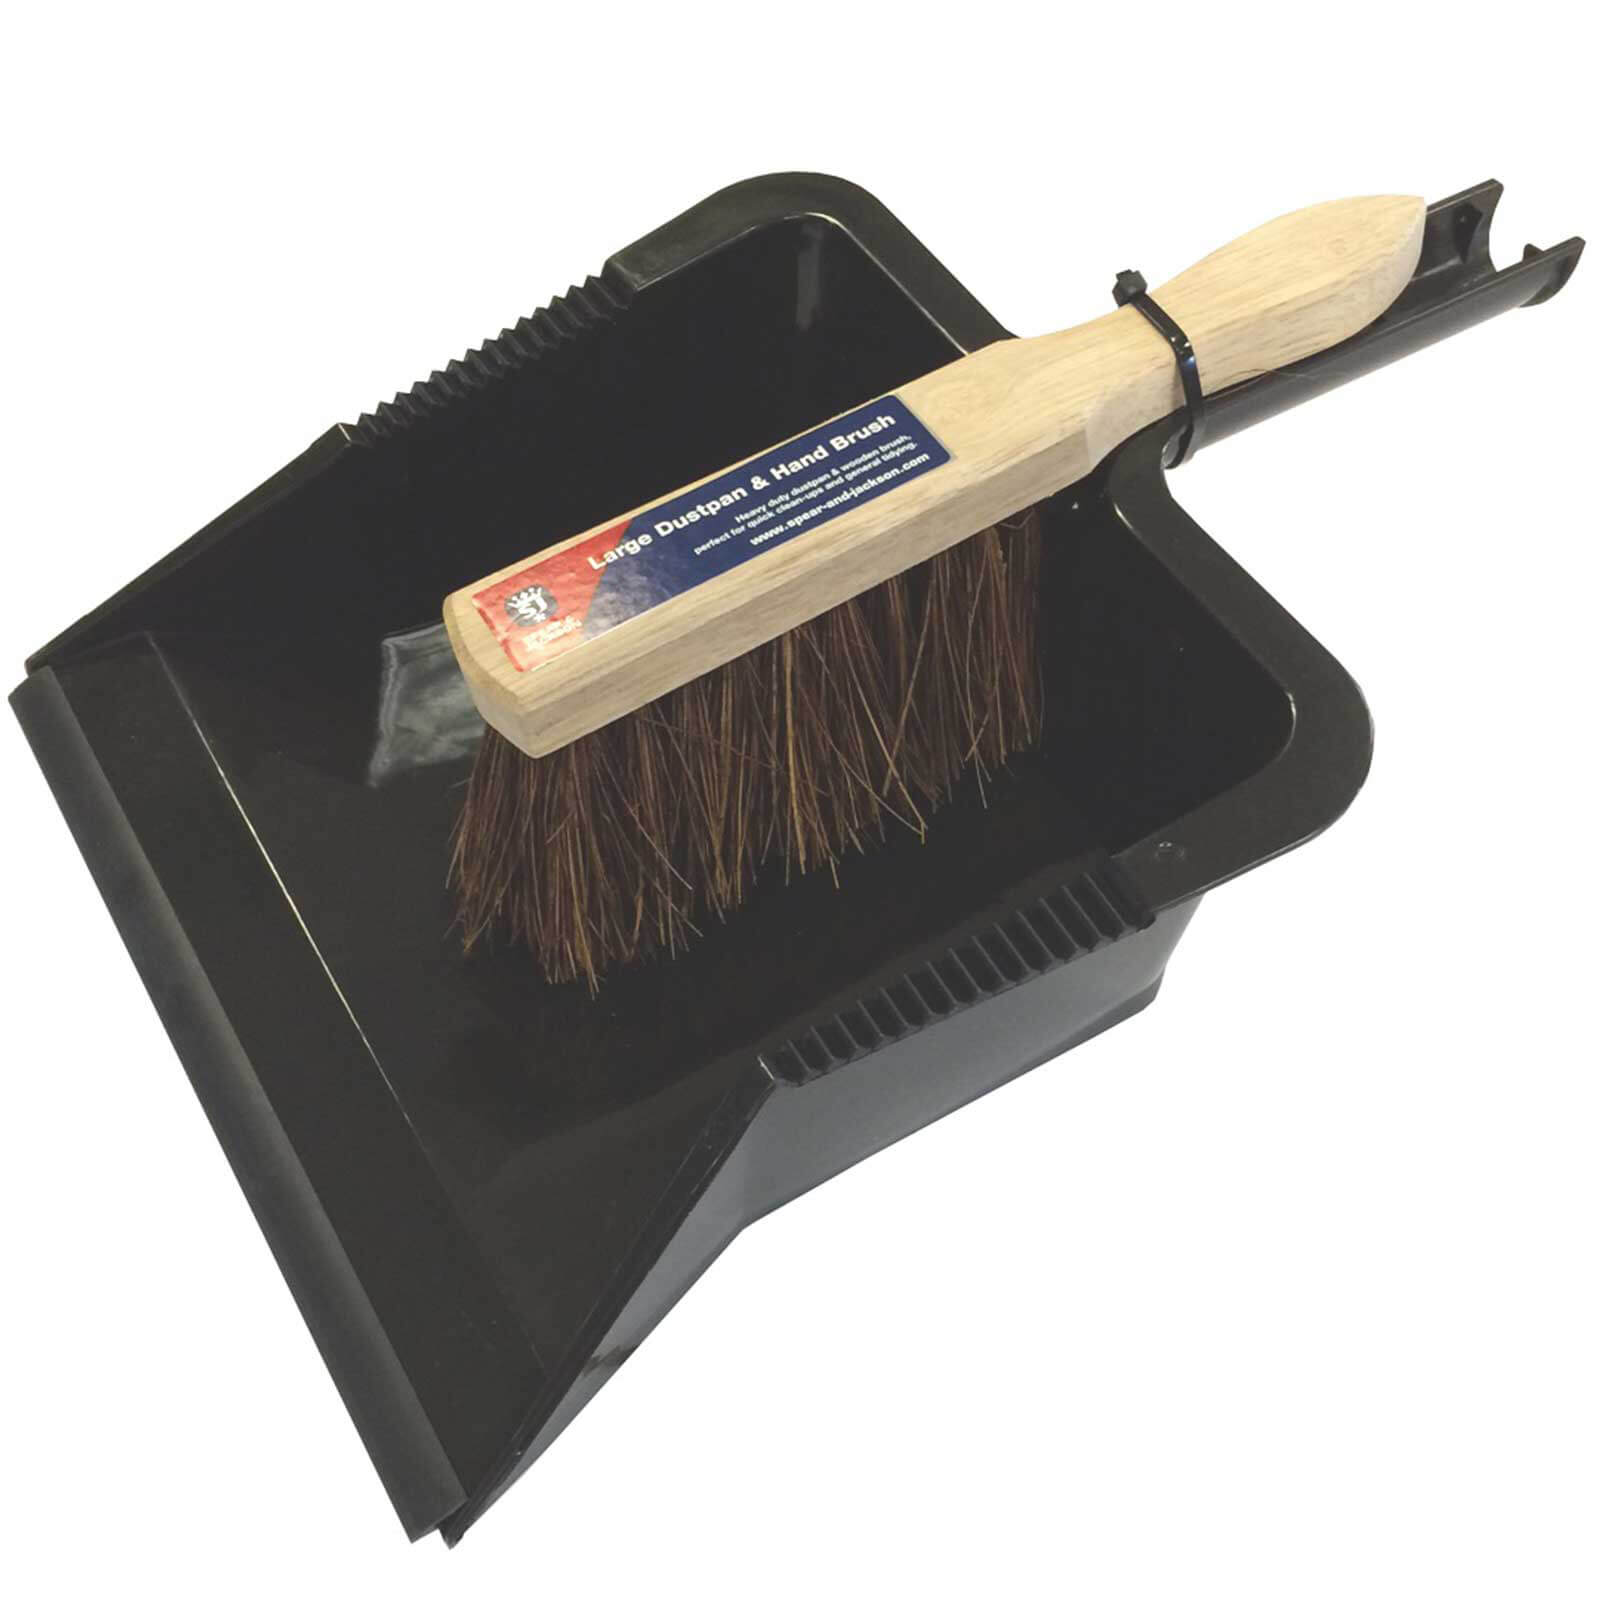 Photo of Spear And Jackson Garden Dustpan And Brush